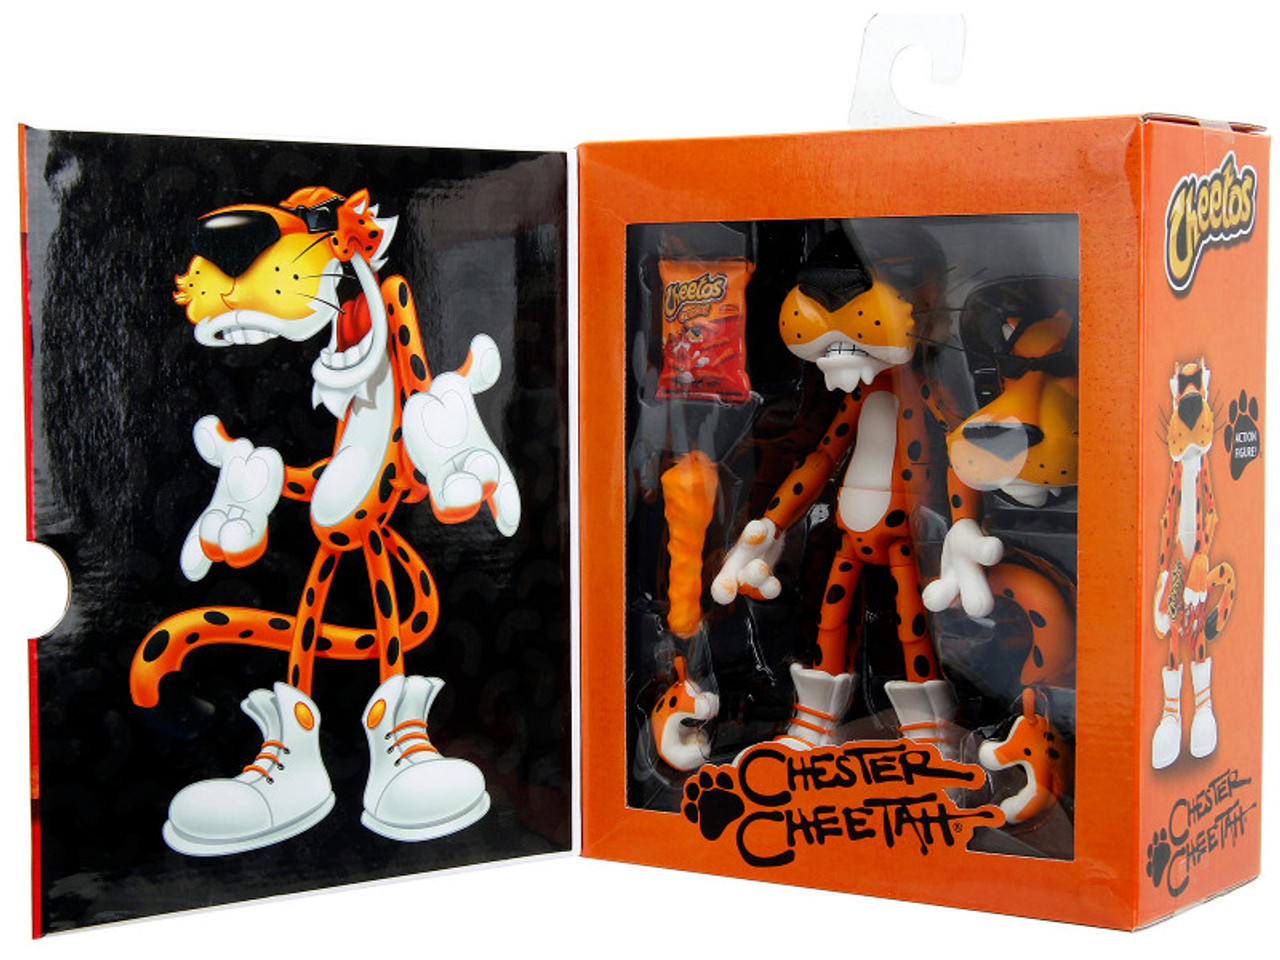 Chester Cheetah 5.5" Figure with Accessories and Alternate Head and Hands "Cheetos Crunchy" model by Jada